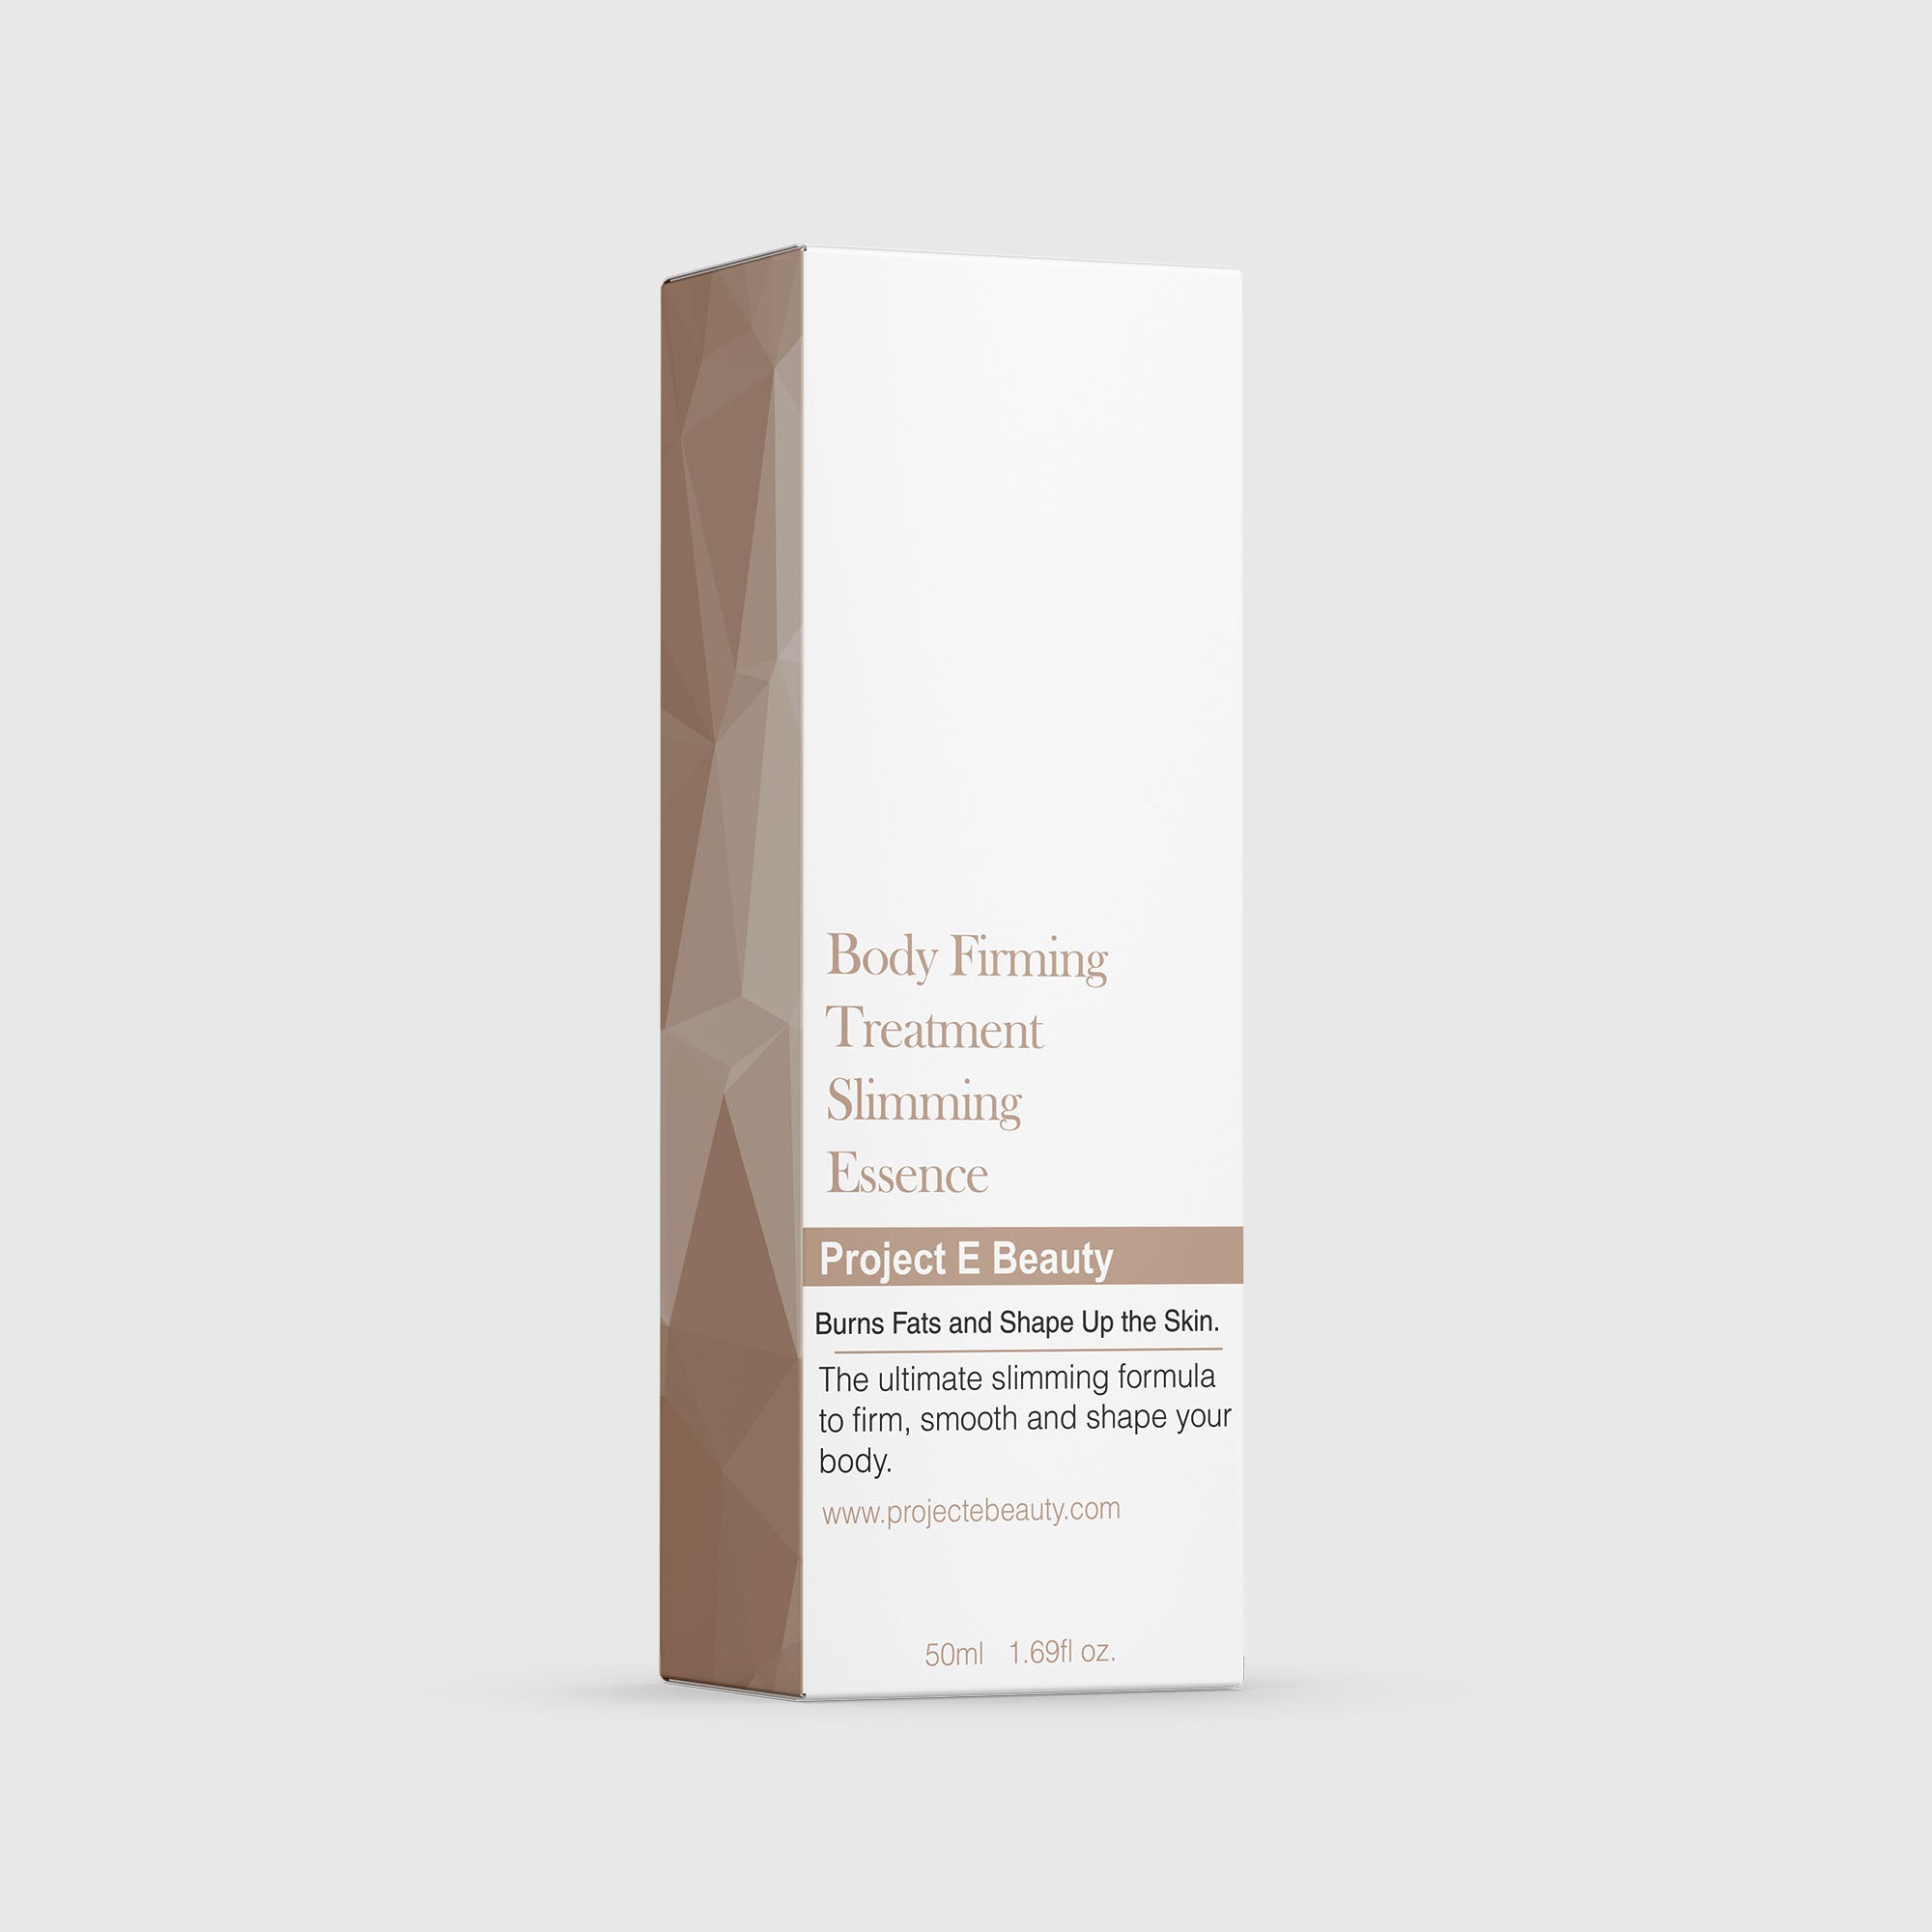 Project E Beauty Body Firming Treatment Slimming Essence